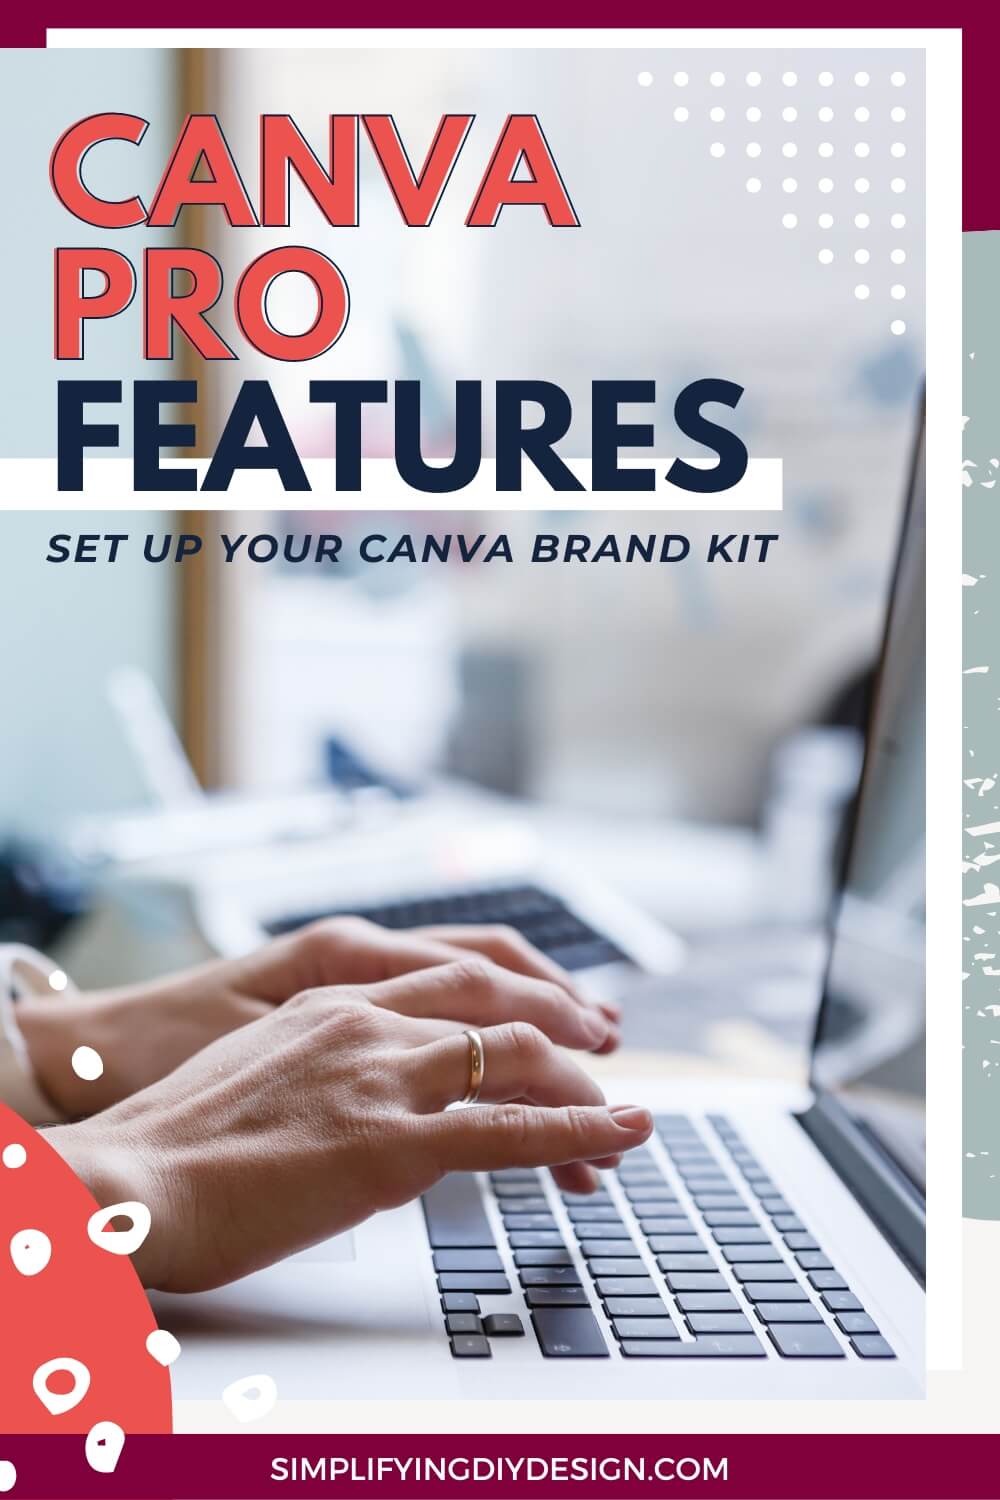 Thinking about upgrading to Canva Pro? Here's a complete breakdown of the best Canva Pro features for bloggers and how you can set up your Brand Kit in Canva!